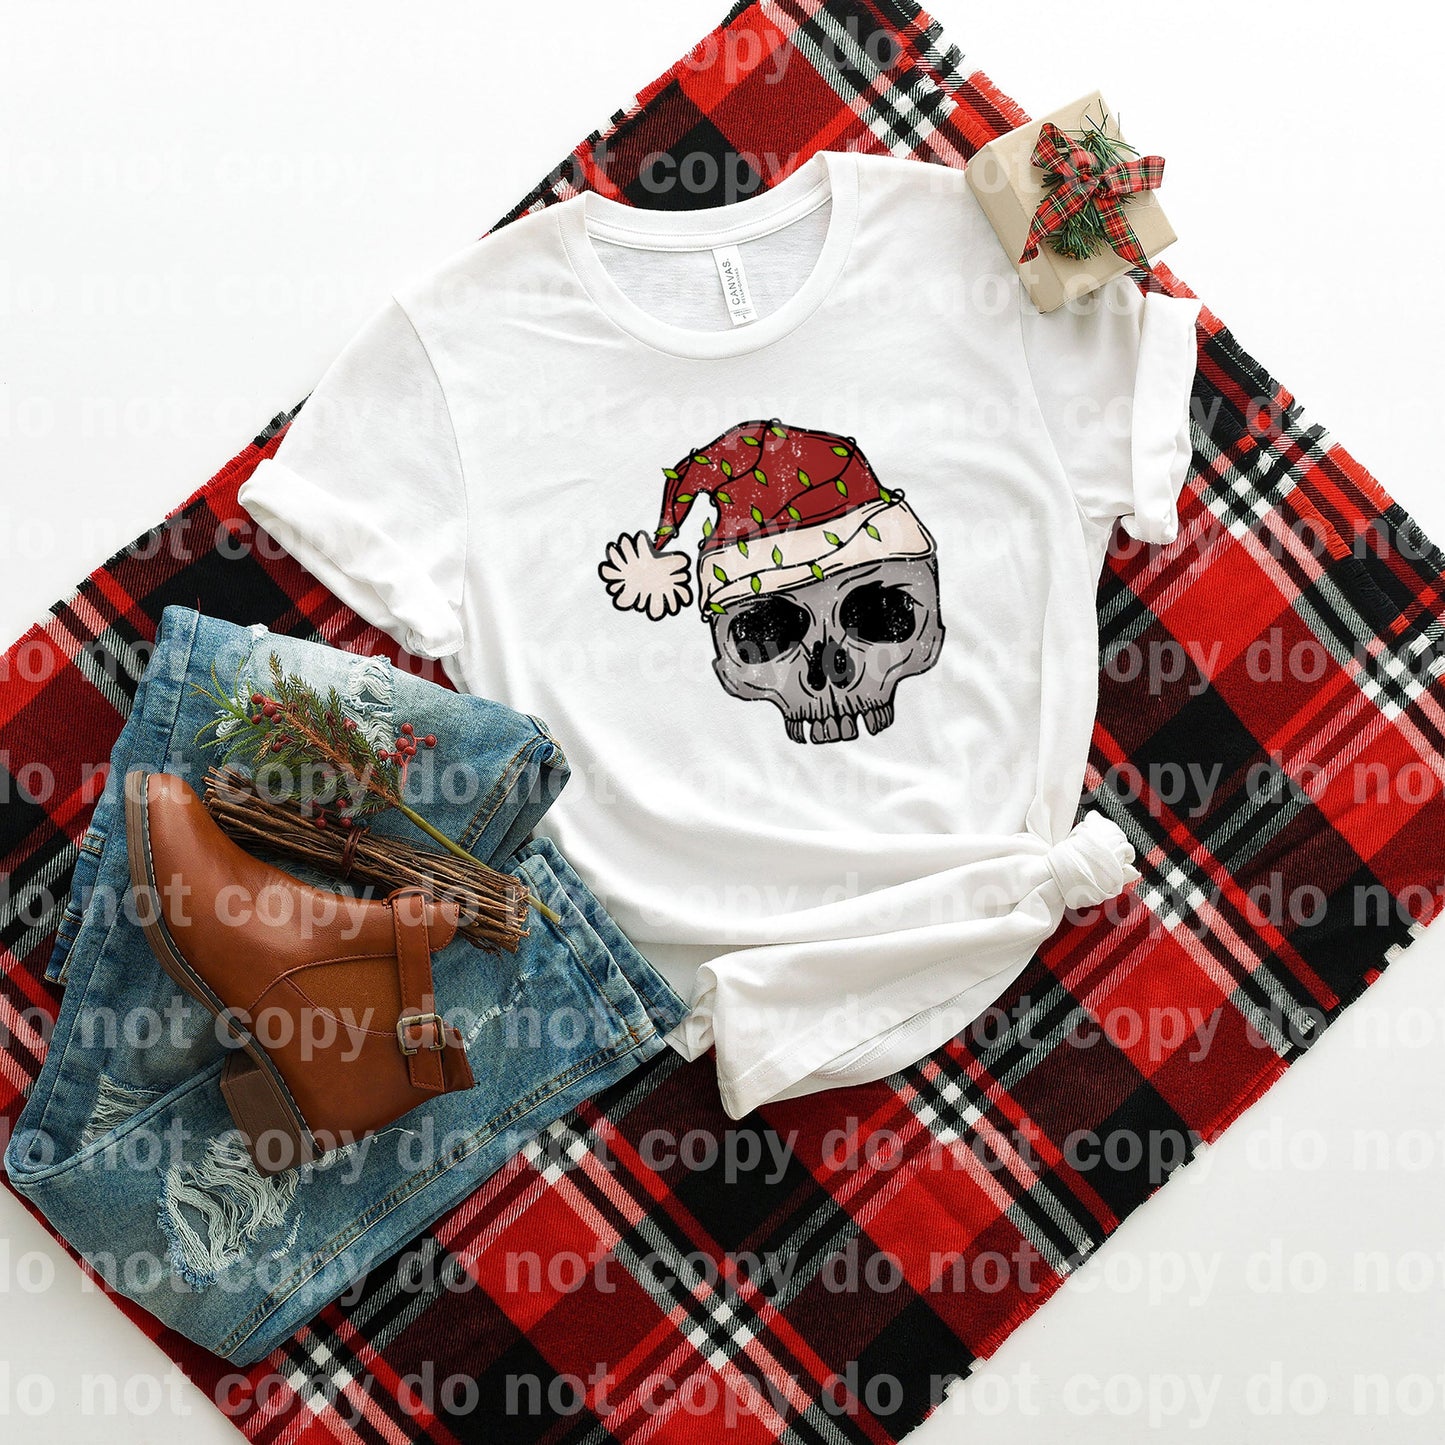 So Merry Lights Distressed Full Color/One Color Dream Print or Sublimation Print